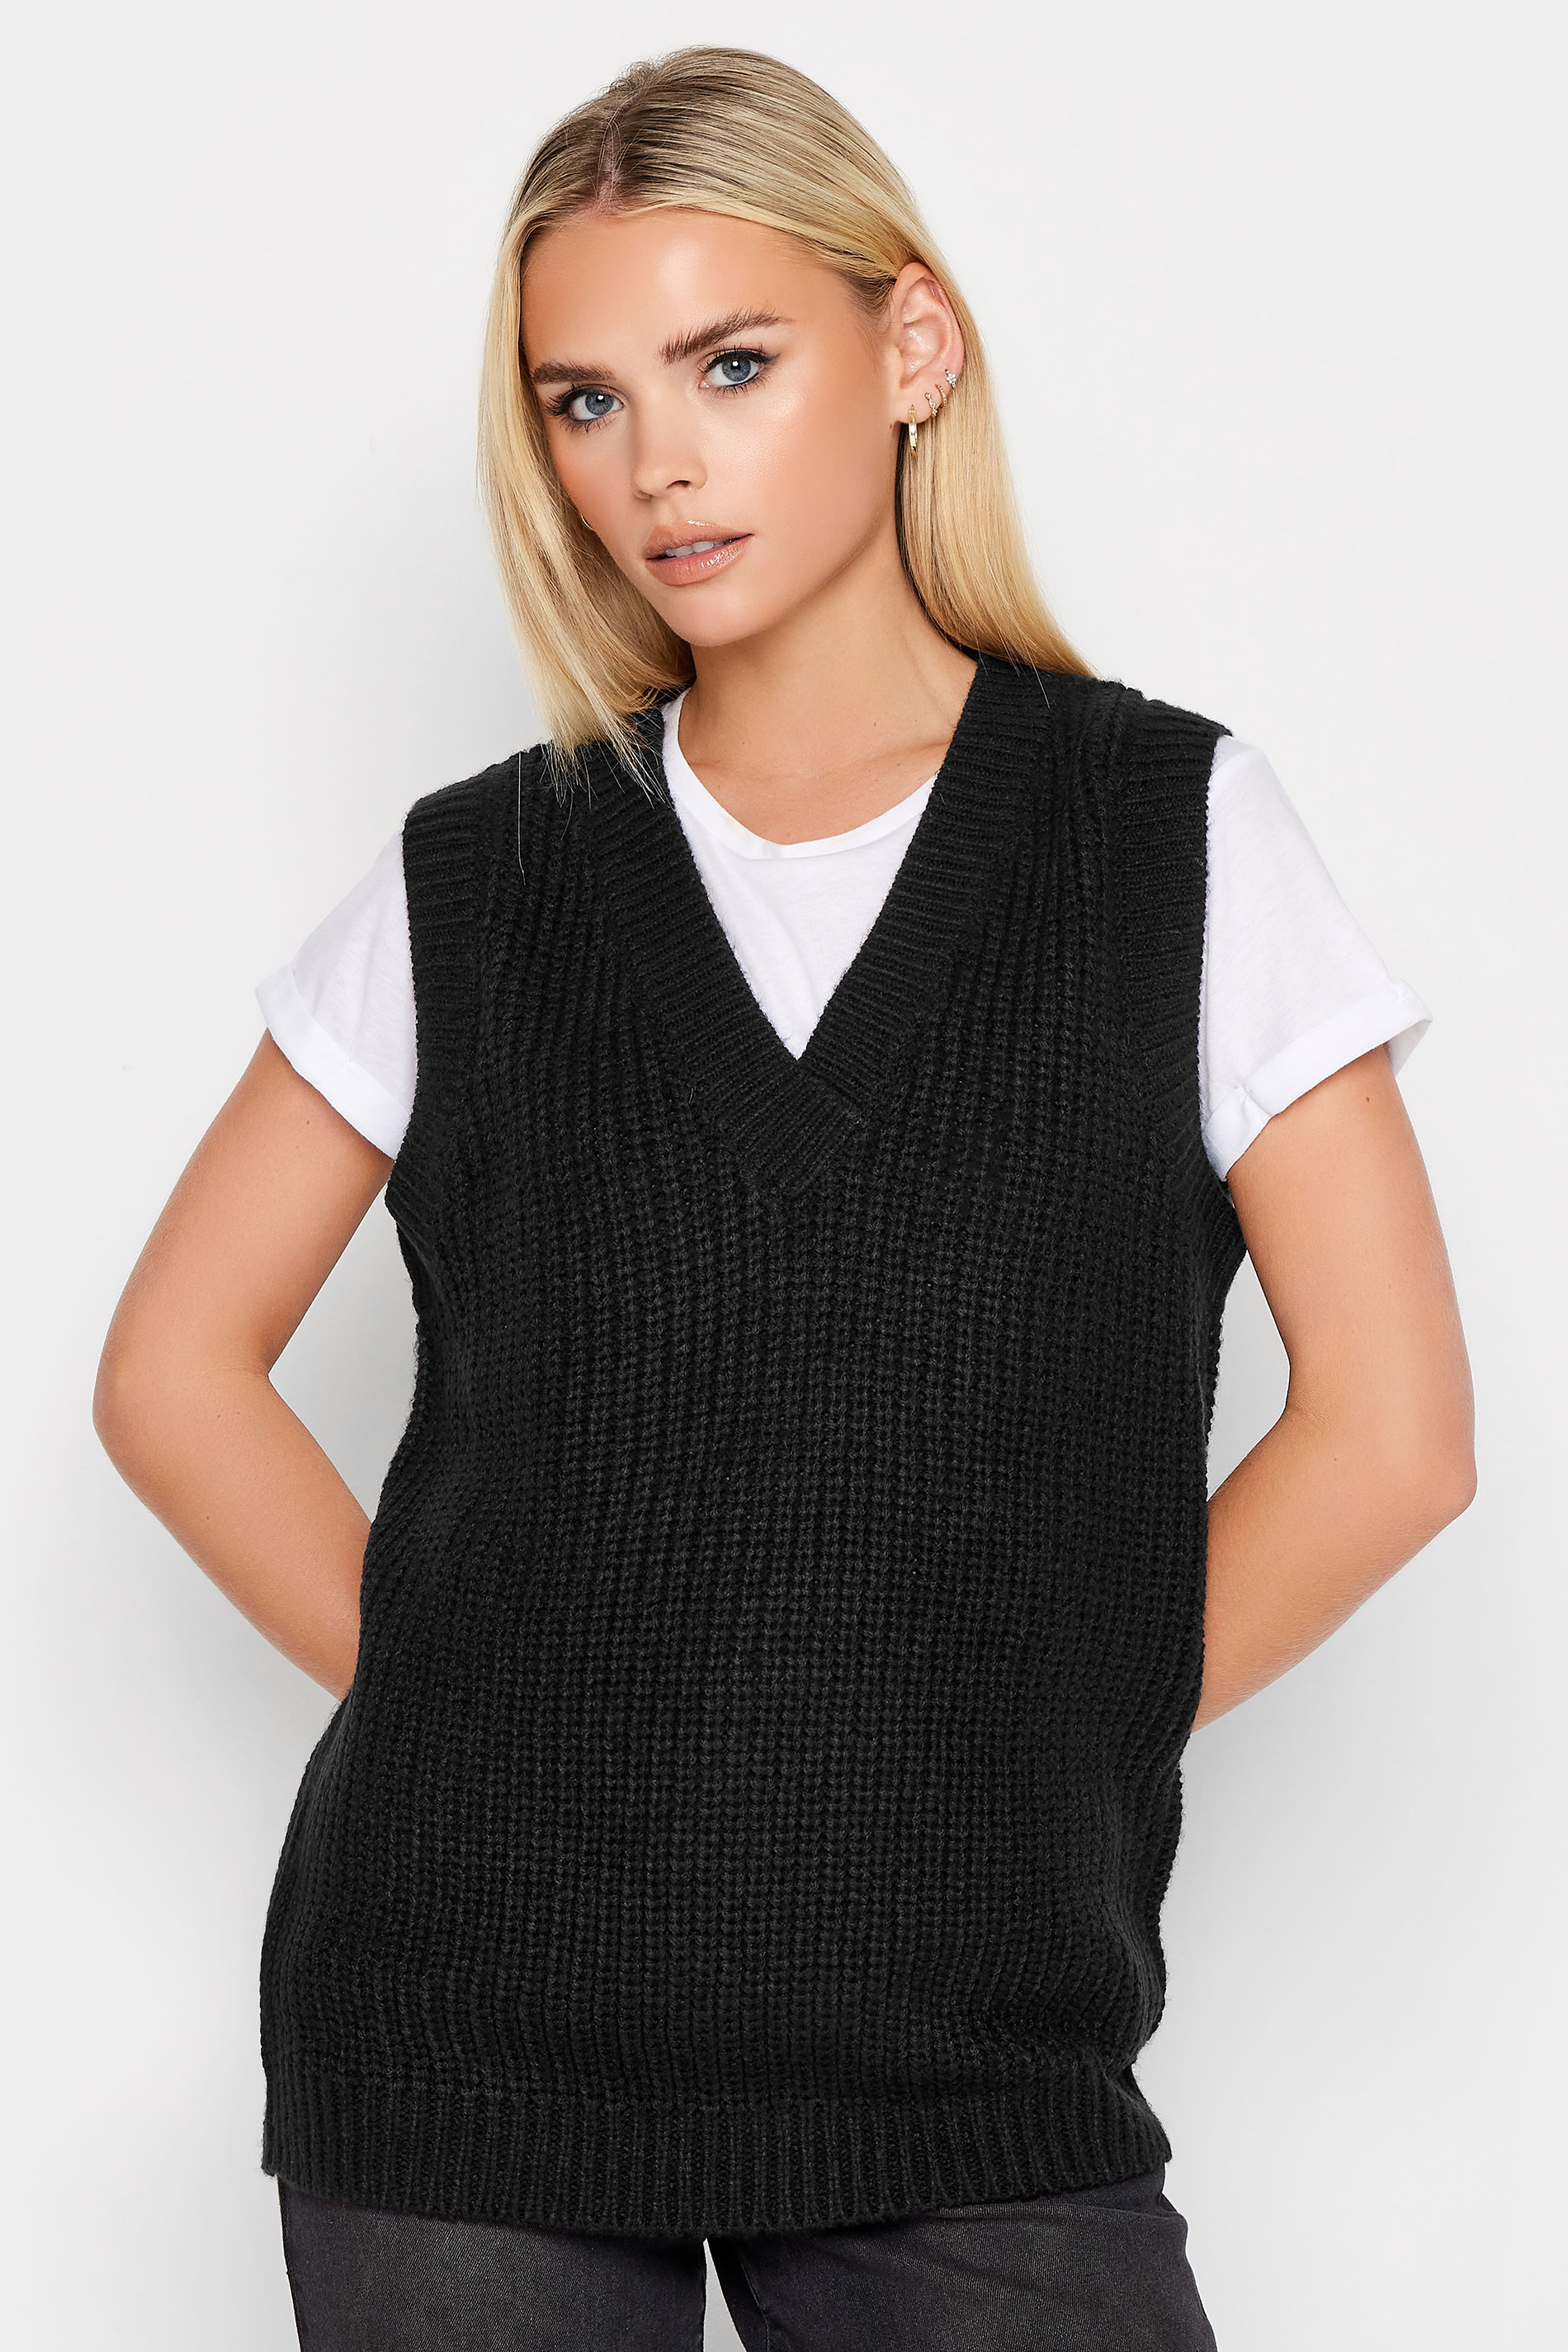 LBECLEY Womens Vest Top Women's V Neck Stripes Outside Wearing A Sweater  with A Super Short Neck Vest Cotton Summer Top Women Puffer Vest Women  Black